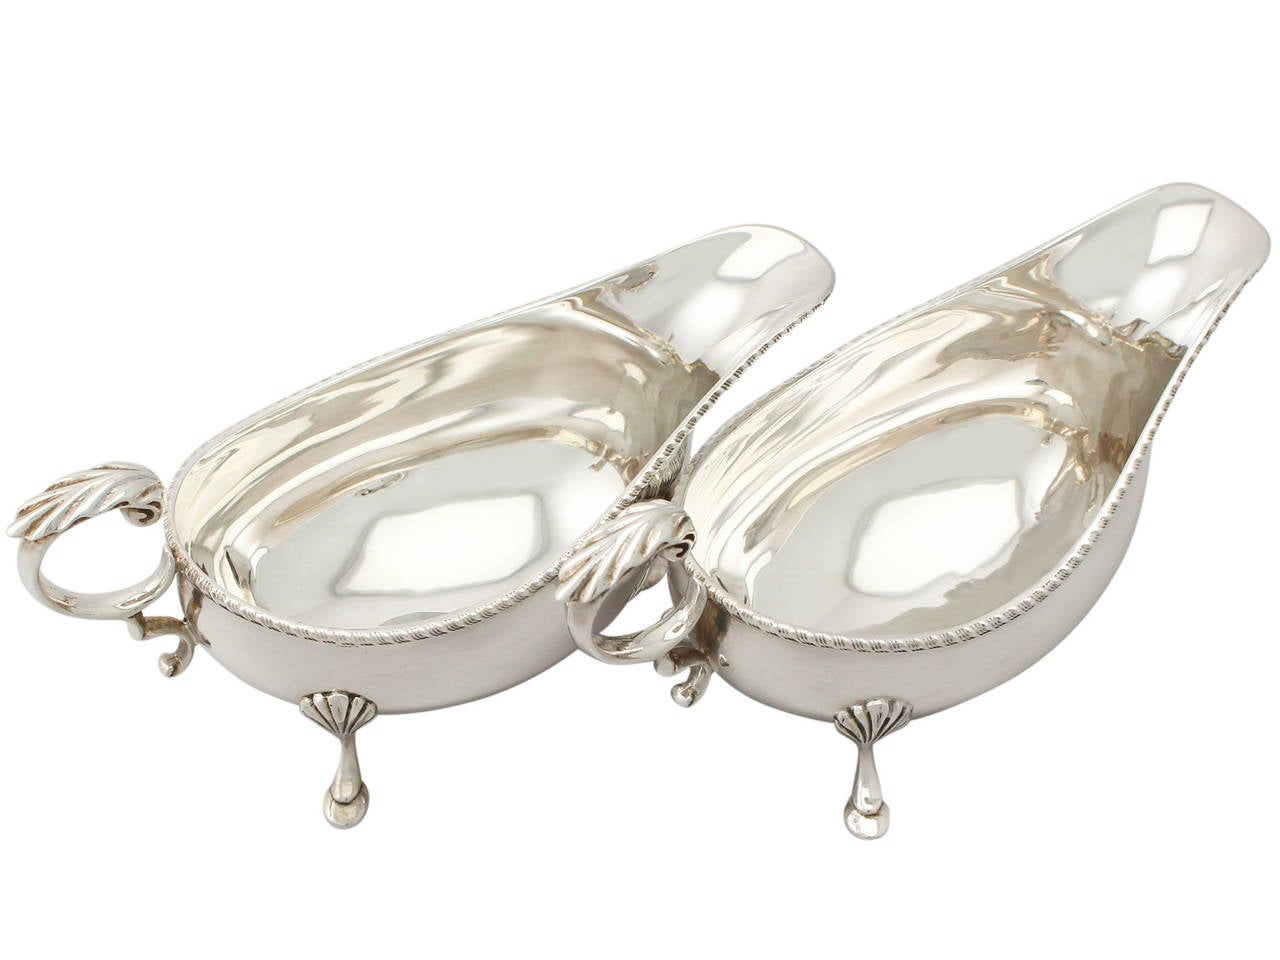 A fine pair of vintage Elizabeth II English sterling silver sauceboats; part of our ornamental dining silverware collection.

These vintage Elizabeth II sterling silver sauceboats have a plain oval boat shaped form.

The body of each vintage